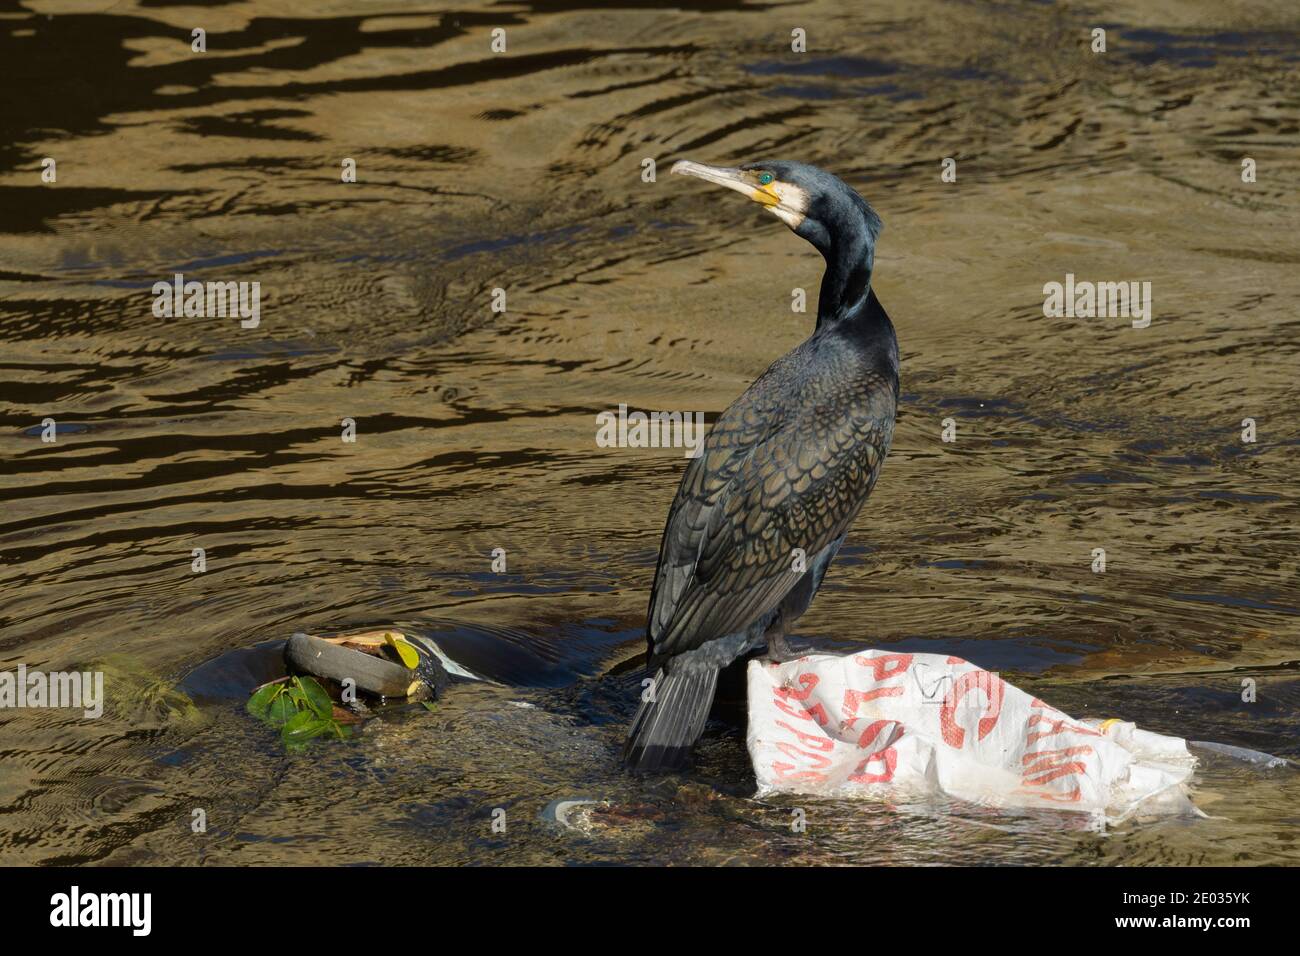 Cormorant (Phalacrocorax carbo) perched on plastic bag, River Mersey, Greater Manchester, UK Stock Photo